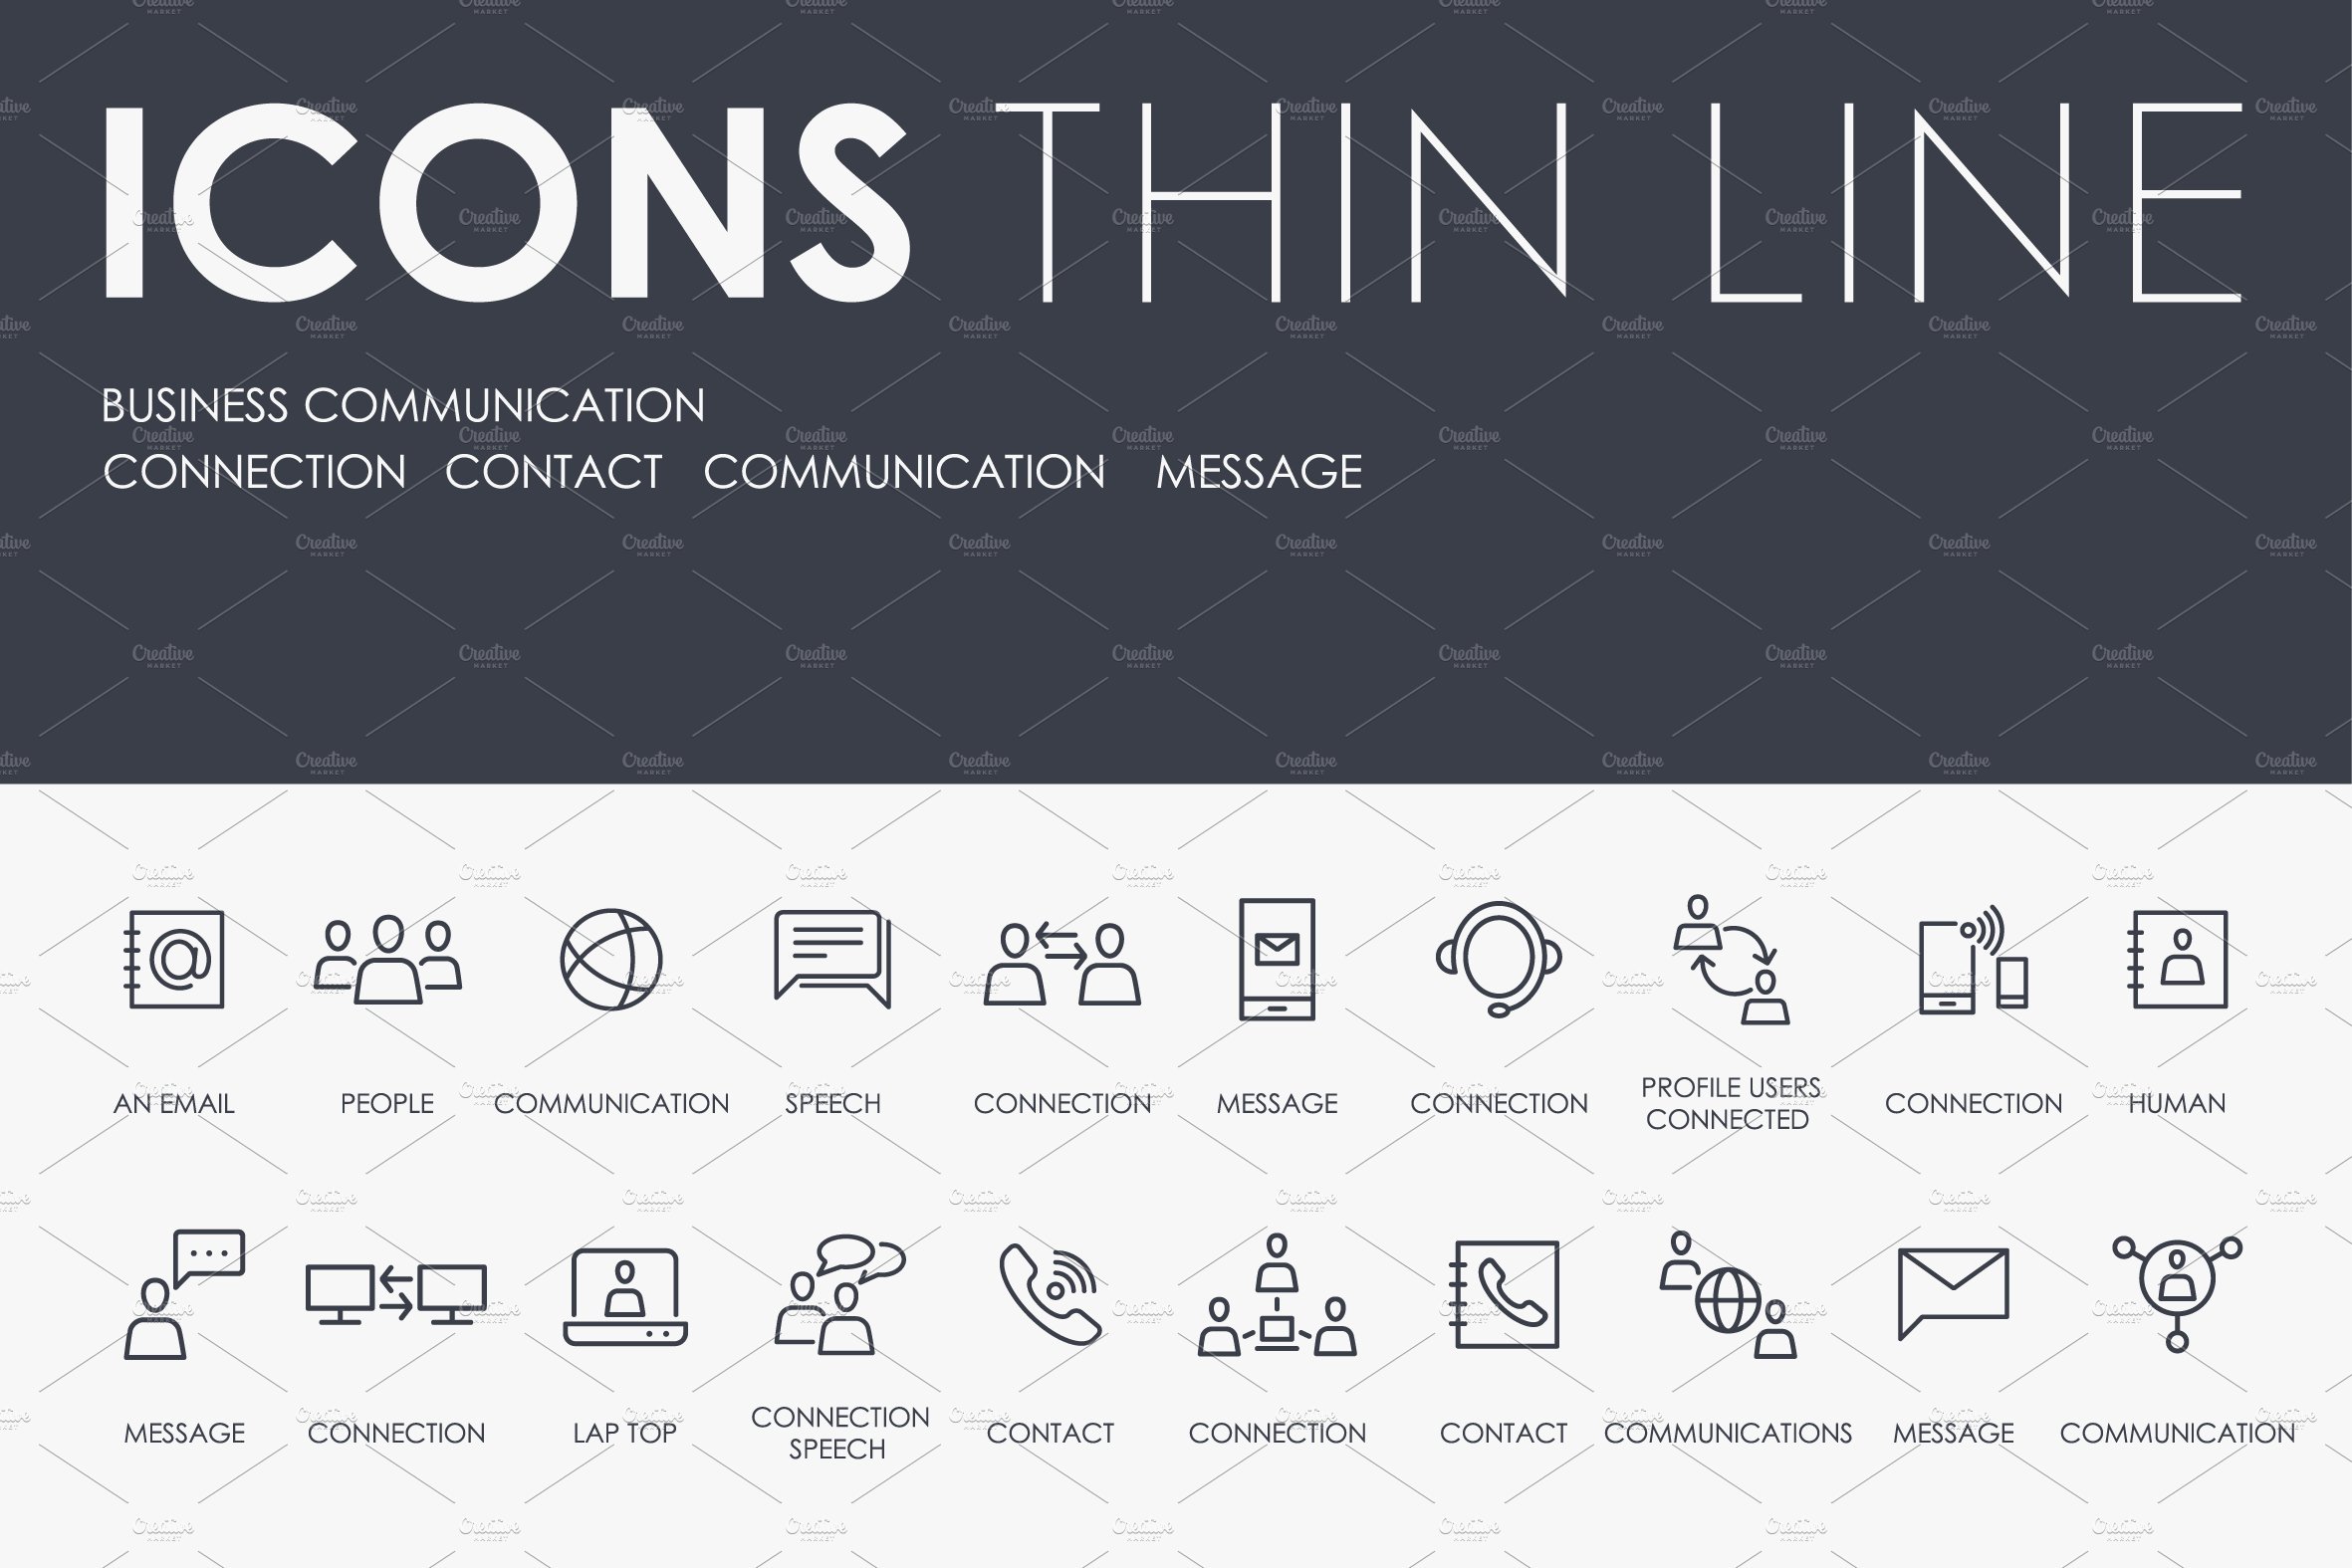 Business communication icons cover image.